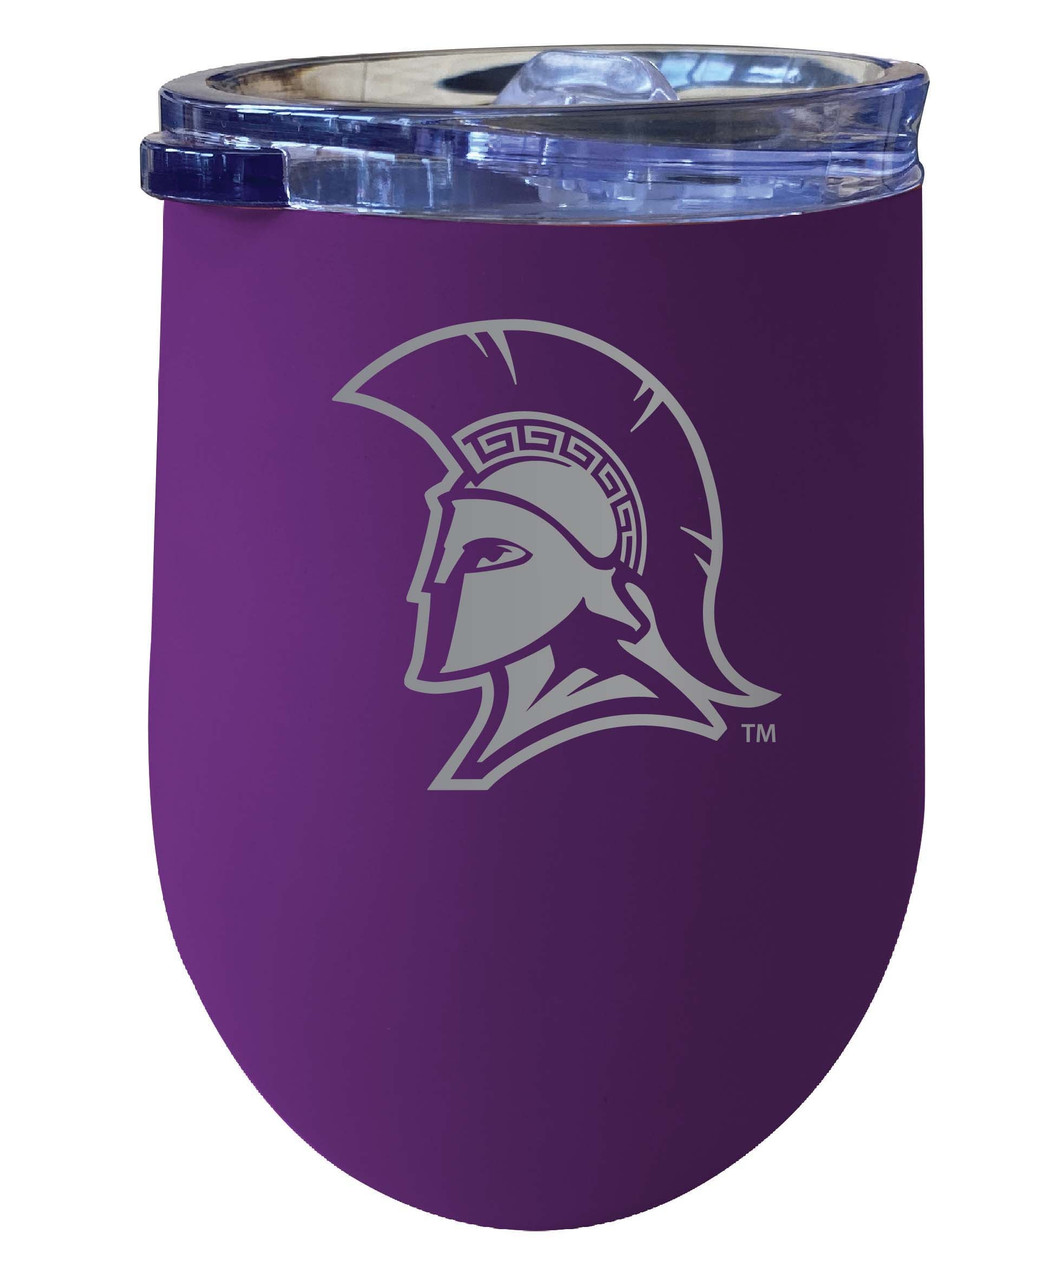 North Carolina Greensboro Spartans 12 oz Etched Insulated Wine Stainless Steel Tumbler Purple